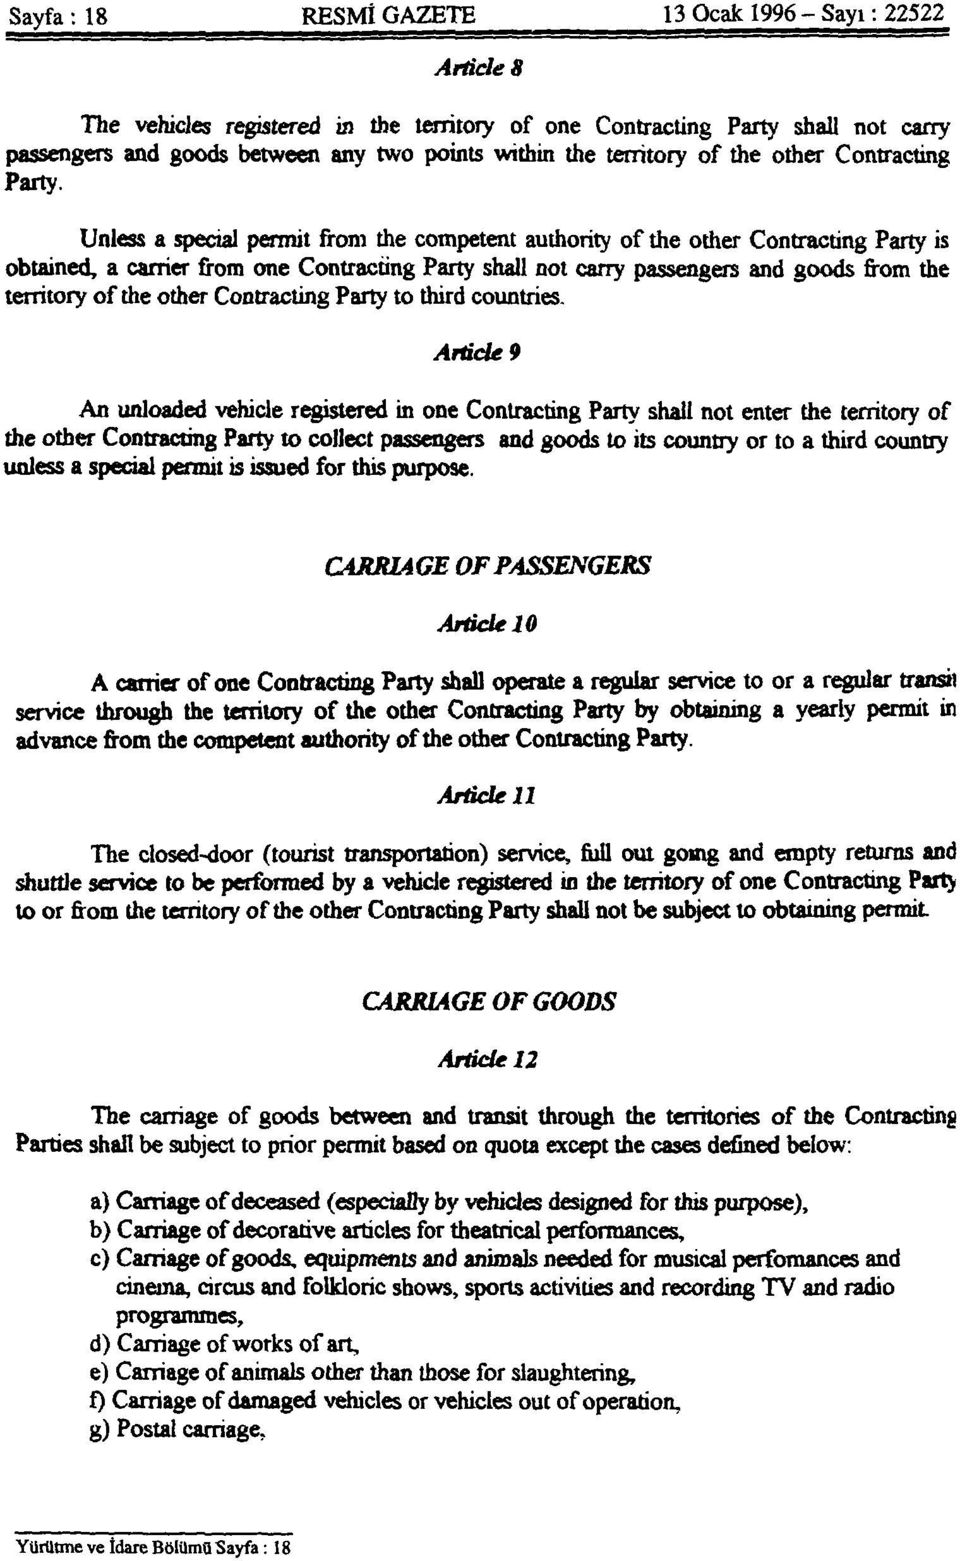 Unless a special permit from the competent authority of the other Contracting Party is obtained, a carrier from one Contracting Party shall not carry passengers and goods from the territory of the